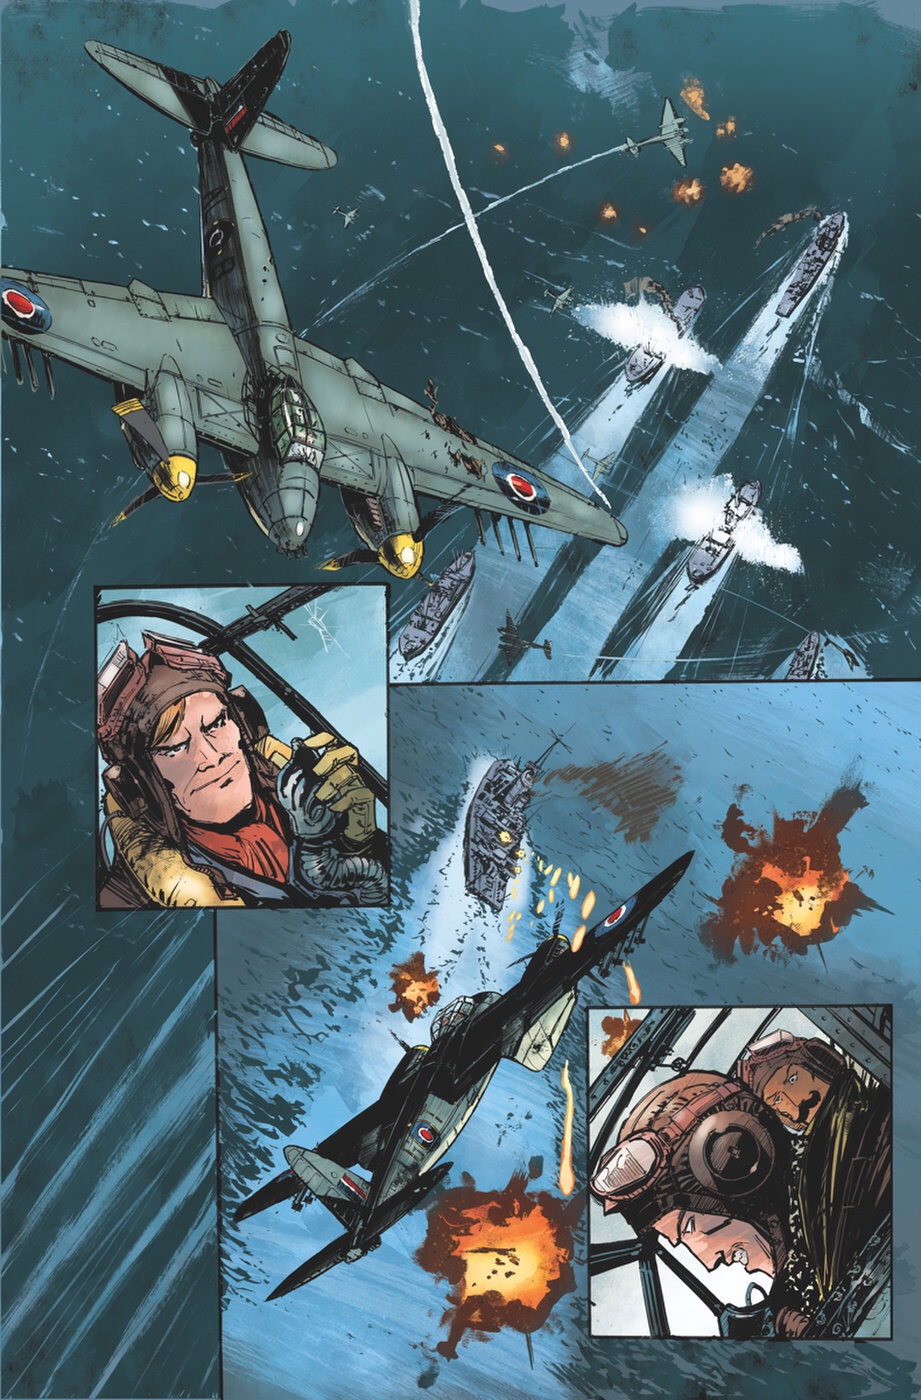 Out of the Blue by Garth Ennis and Keith Burns